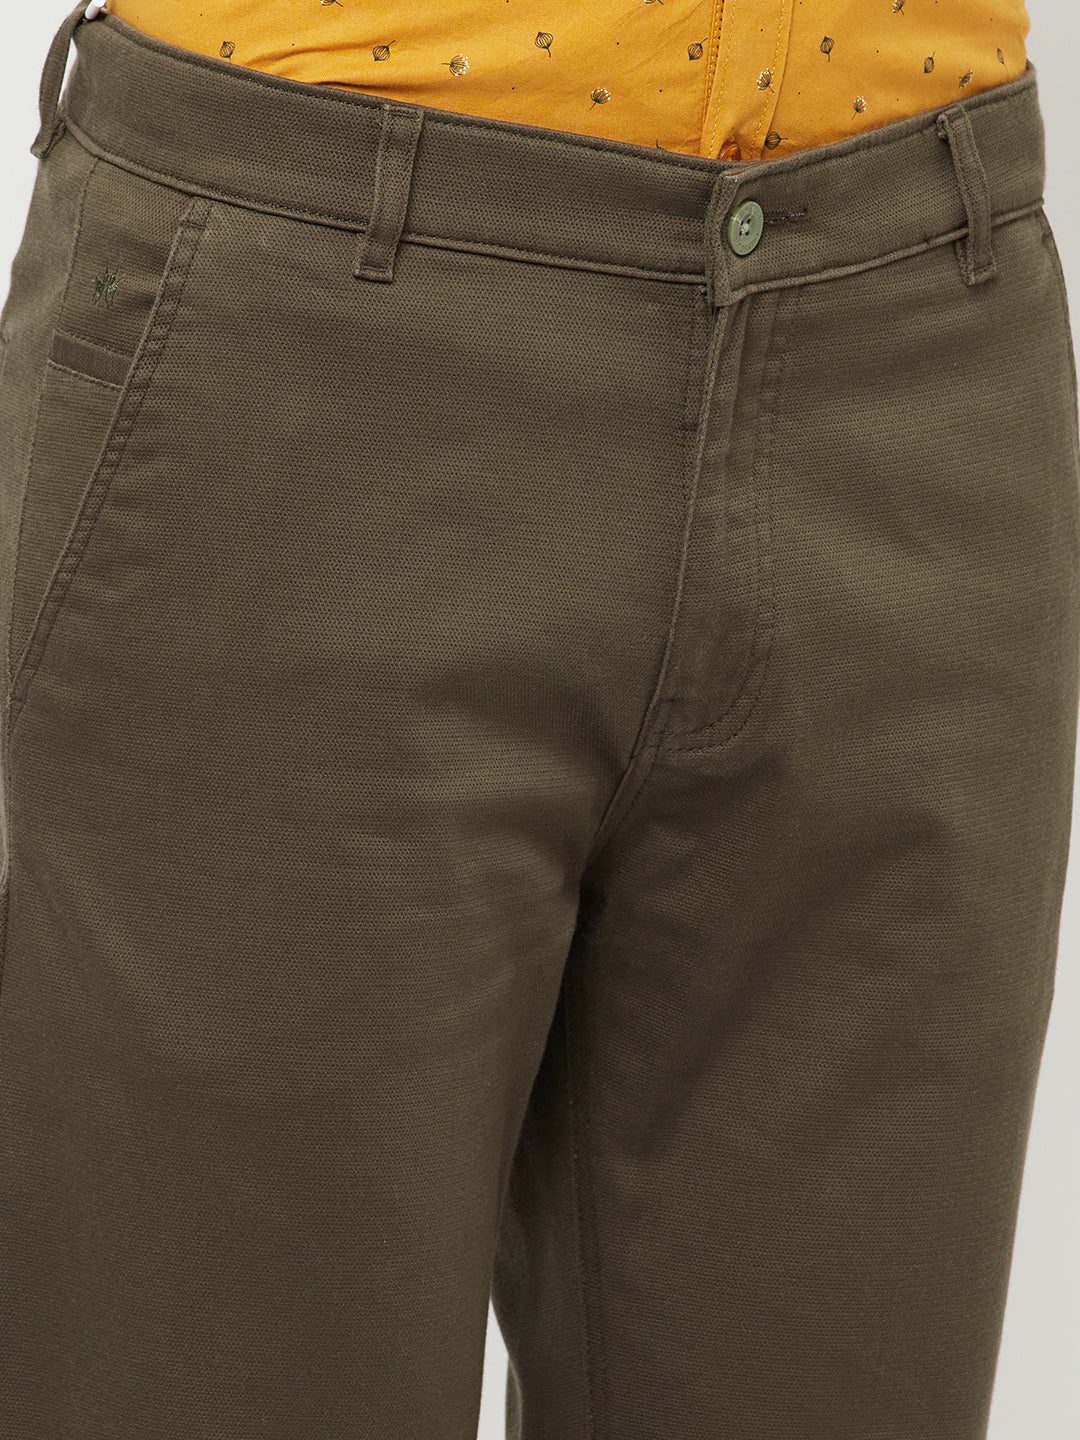 Olive Casual Trousers - Men Trousers